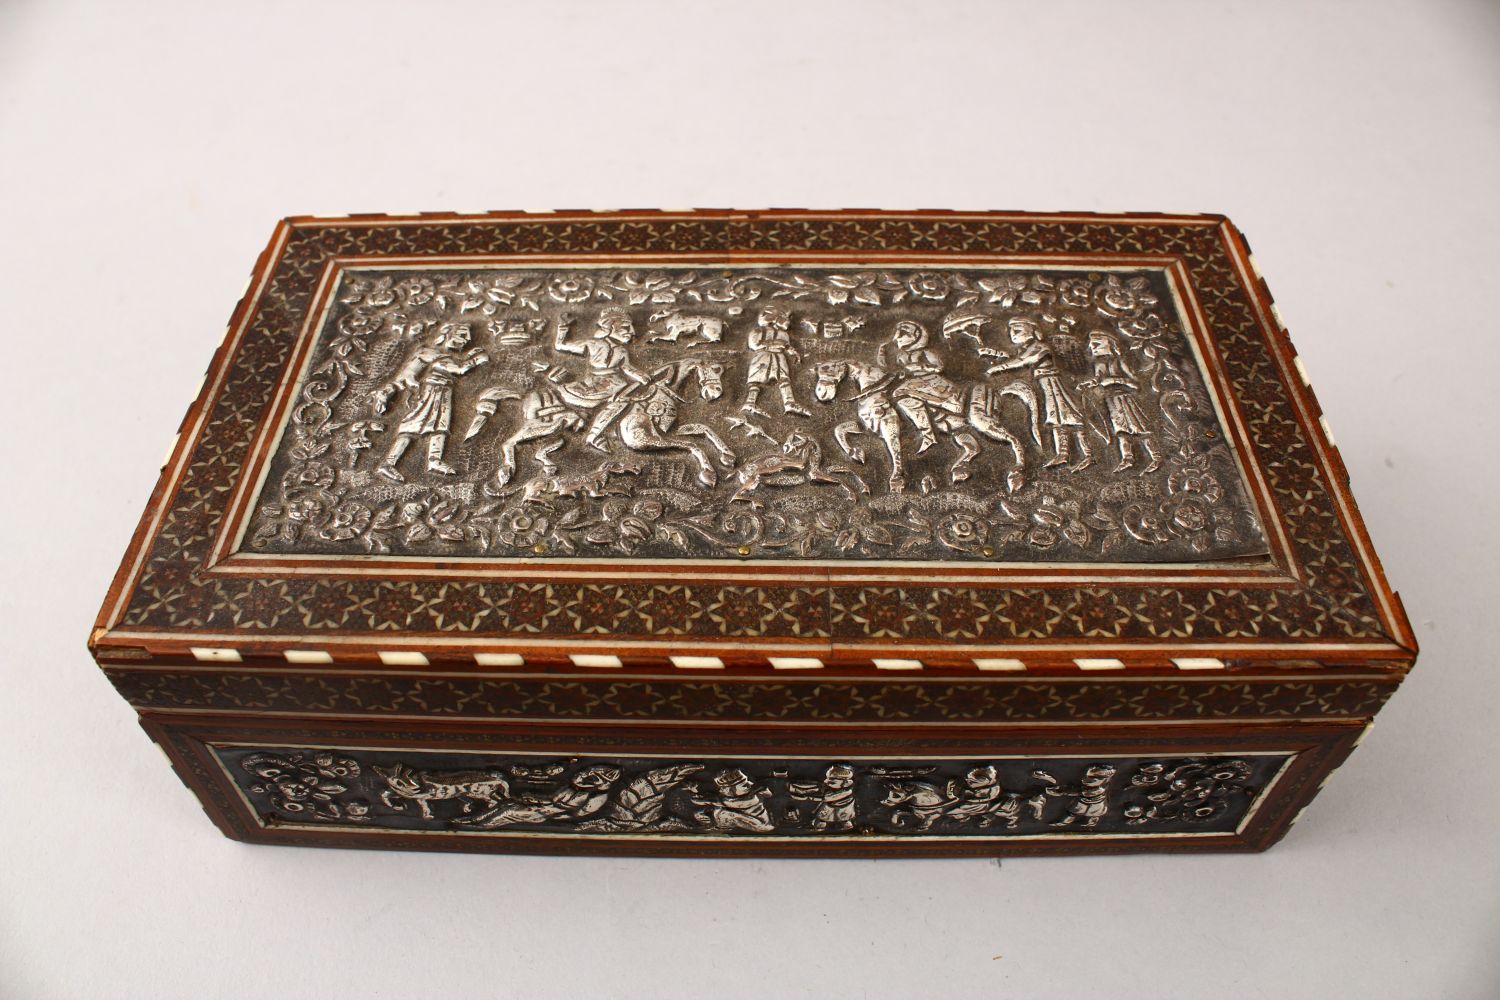 A GOOD IRANIAN SHIRAZ KHATEMI WOODEN & WHITE METAL BOX, the bod with inset white metal embossed - Image 2 of 10